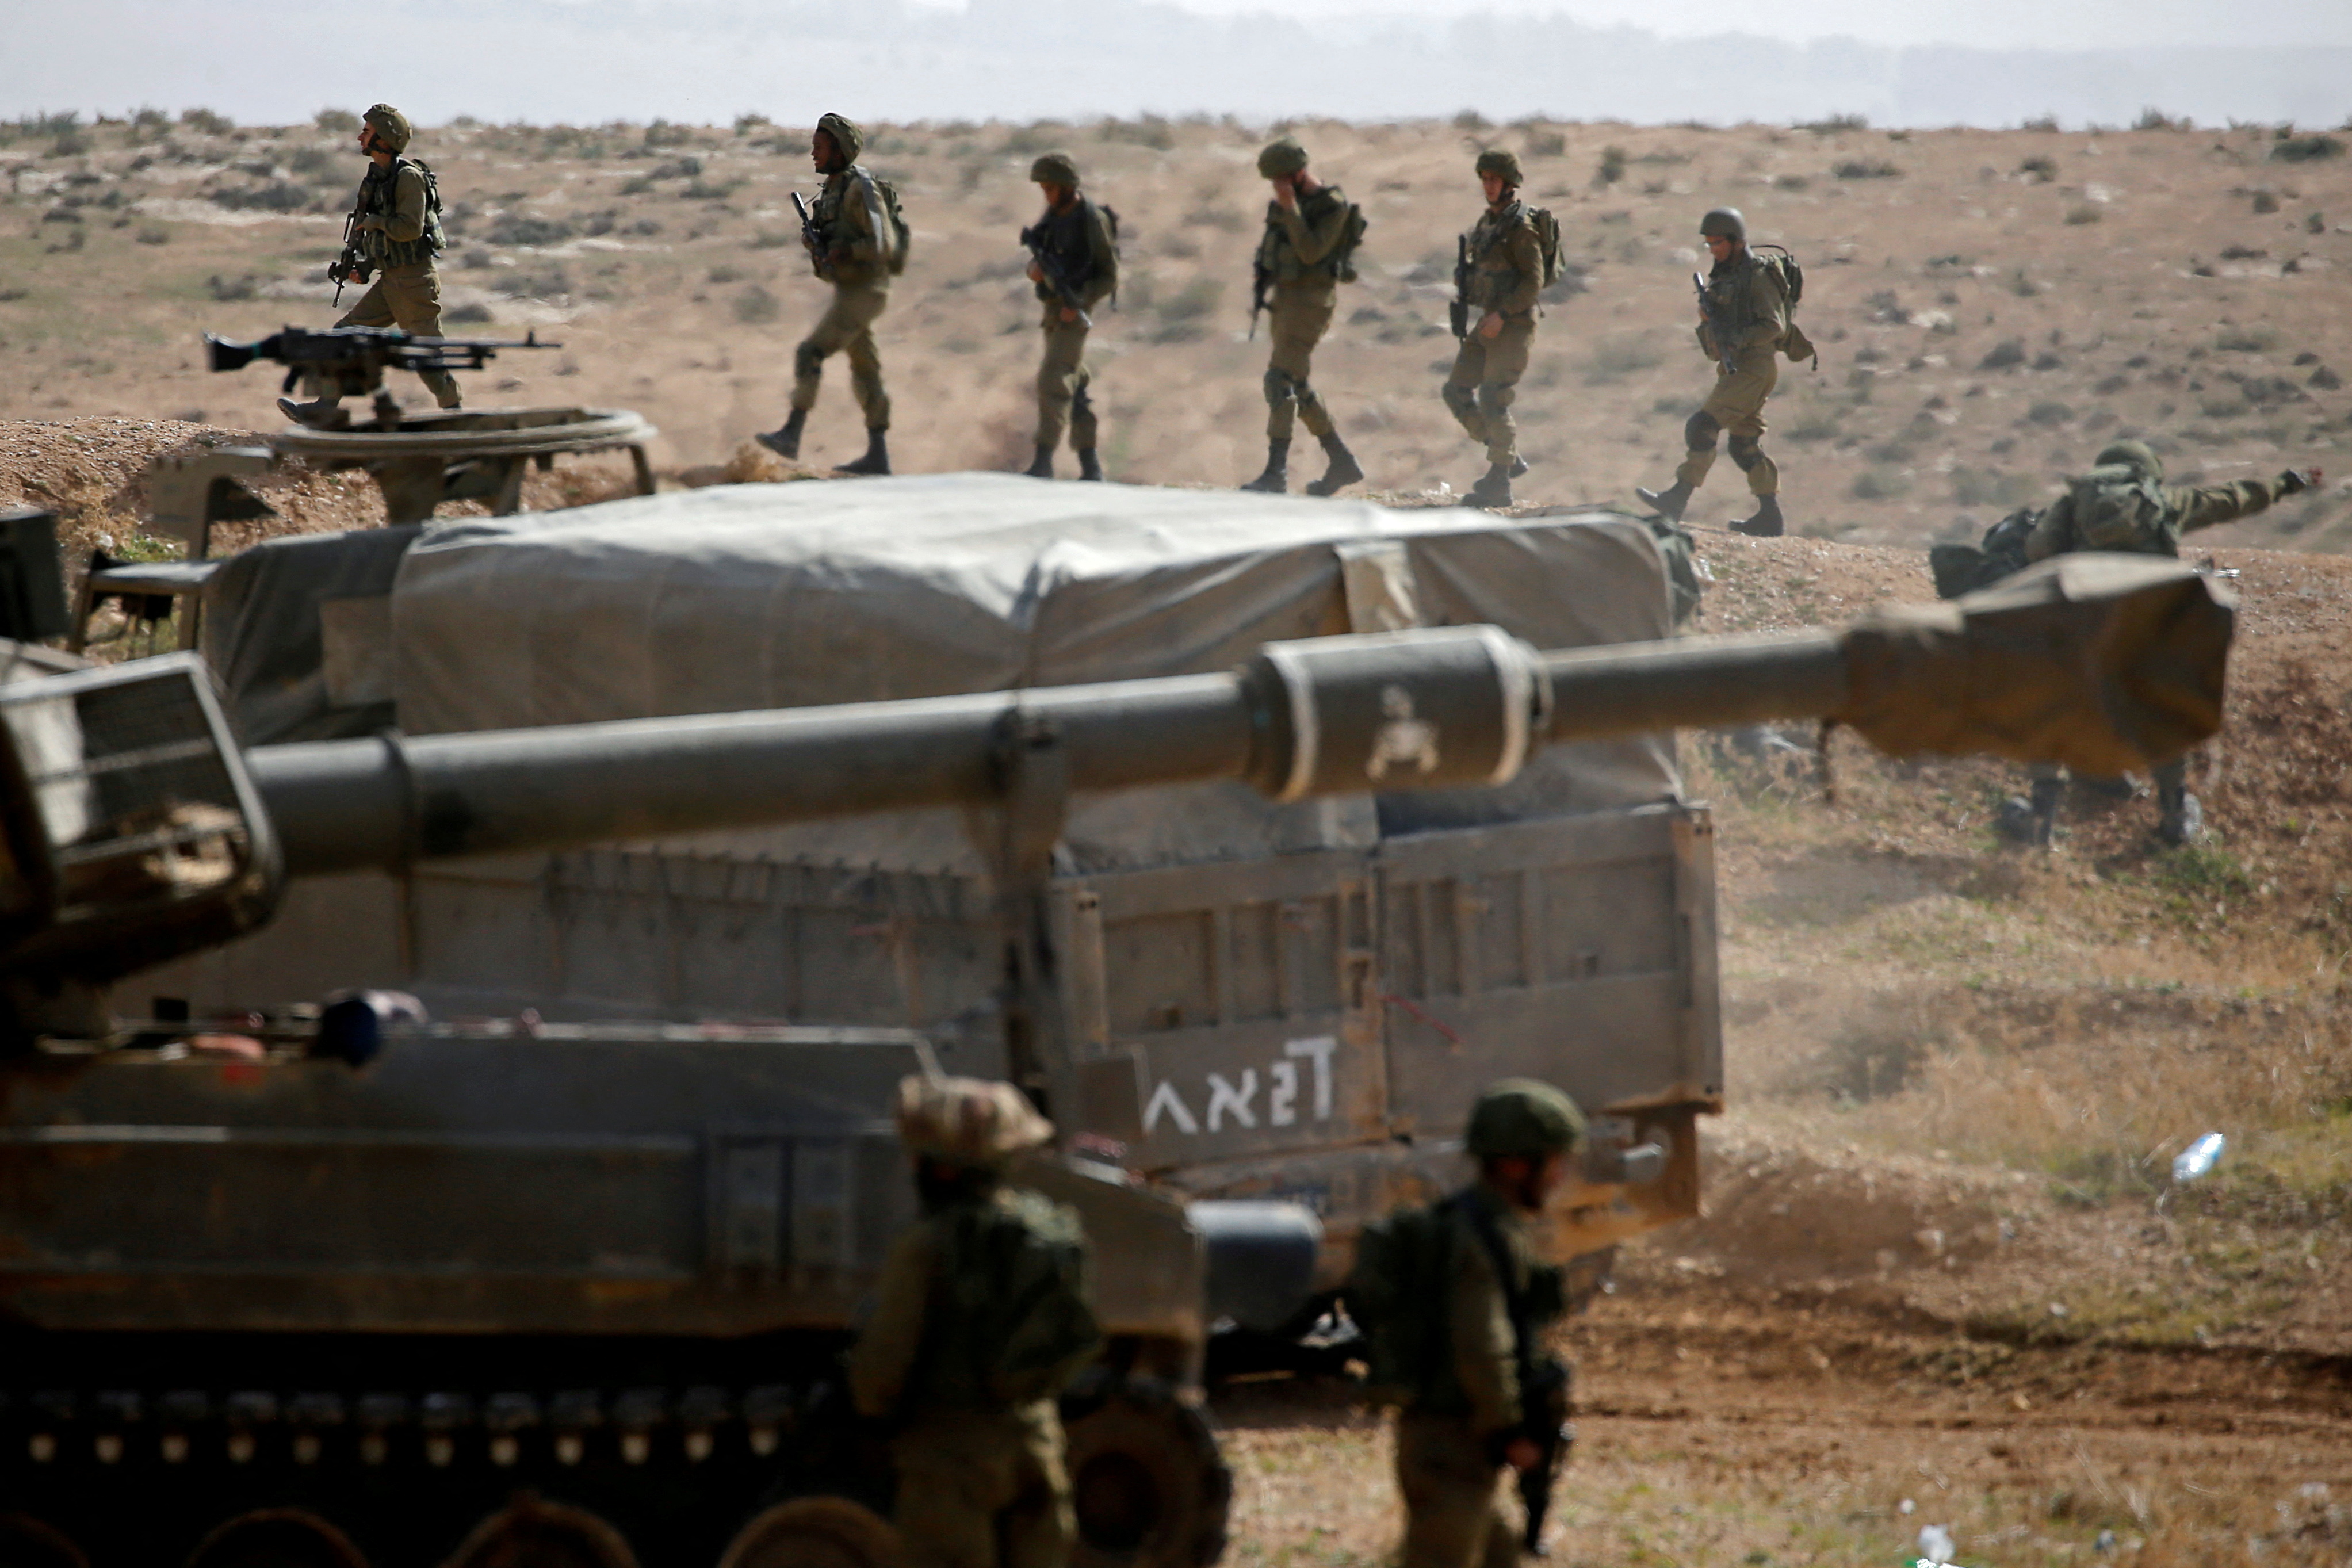 Israel soldiers take part in a military exercise in West Bank